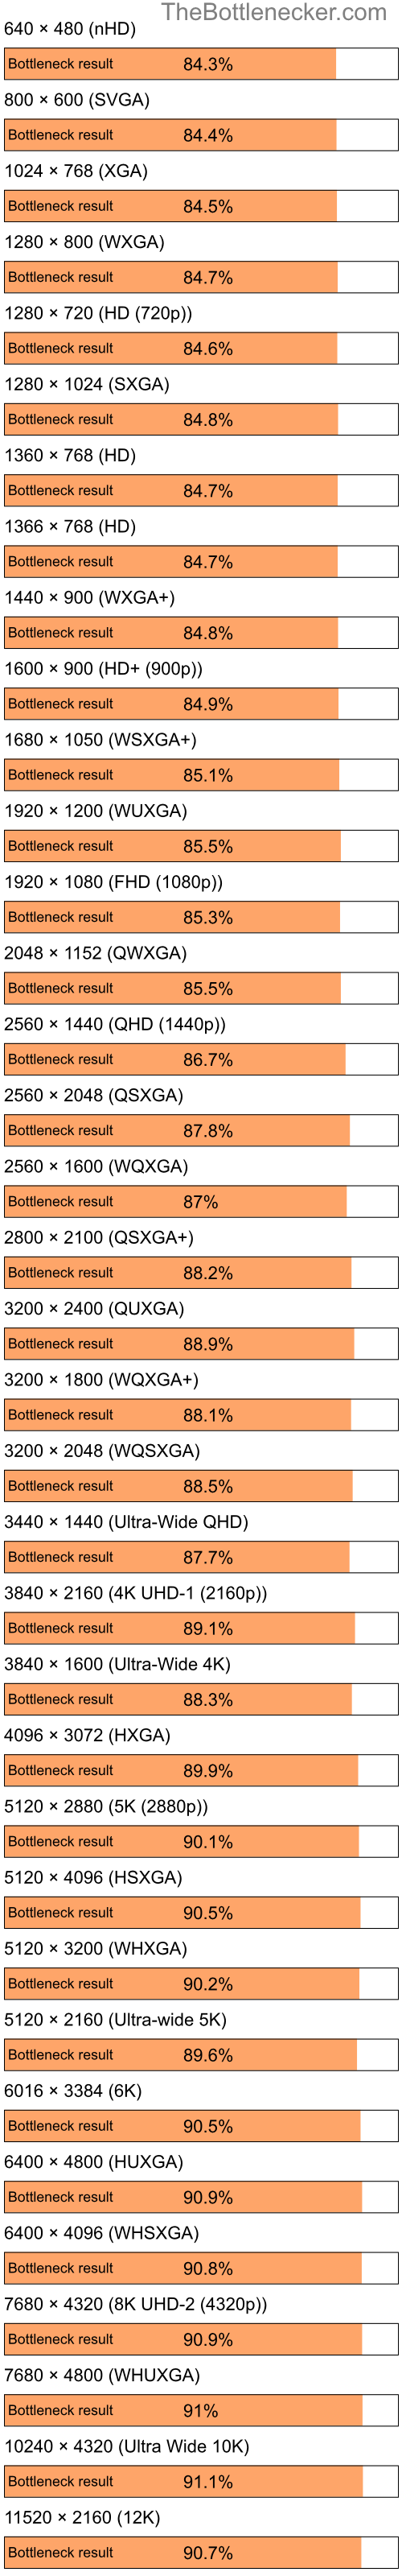 Bottleneck results by resolution for Intel Celeron and NVIDIA GeForce Go 6150 in Graphic Card Intense Tasks